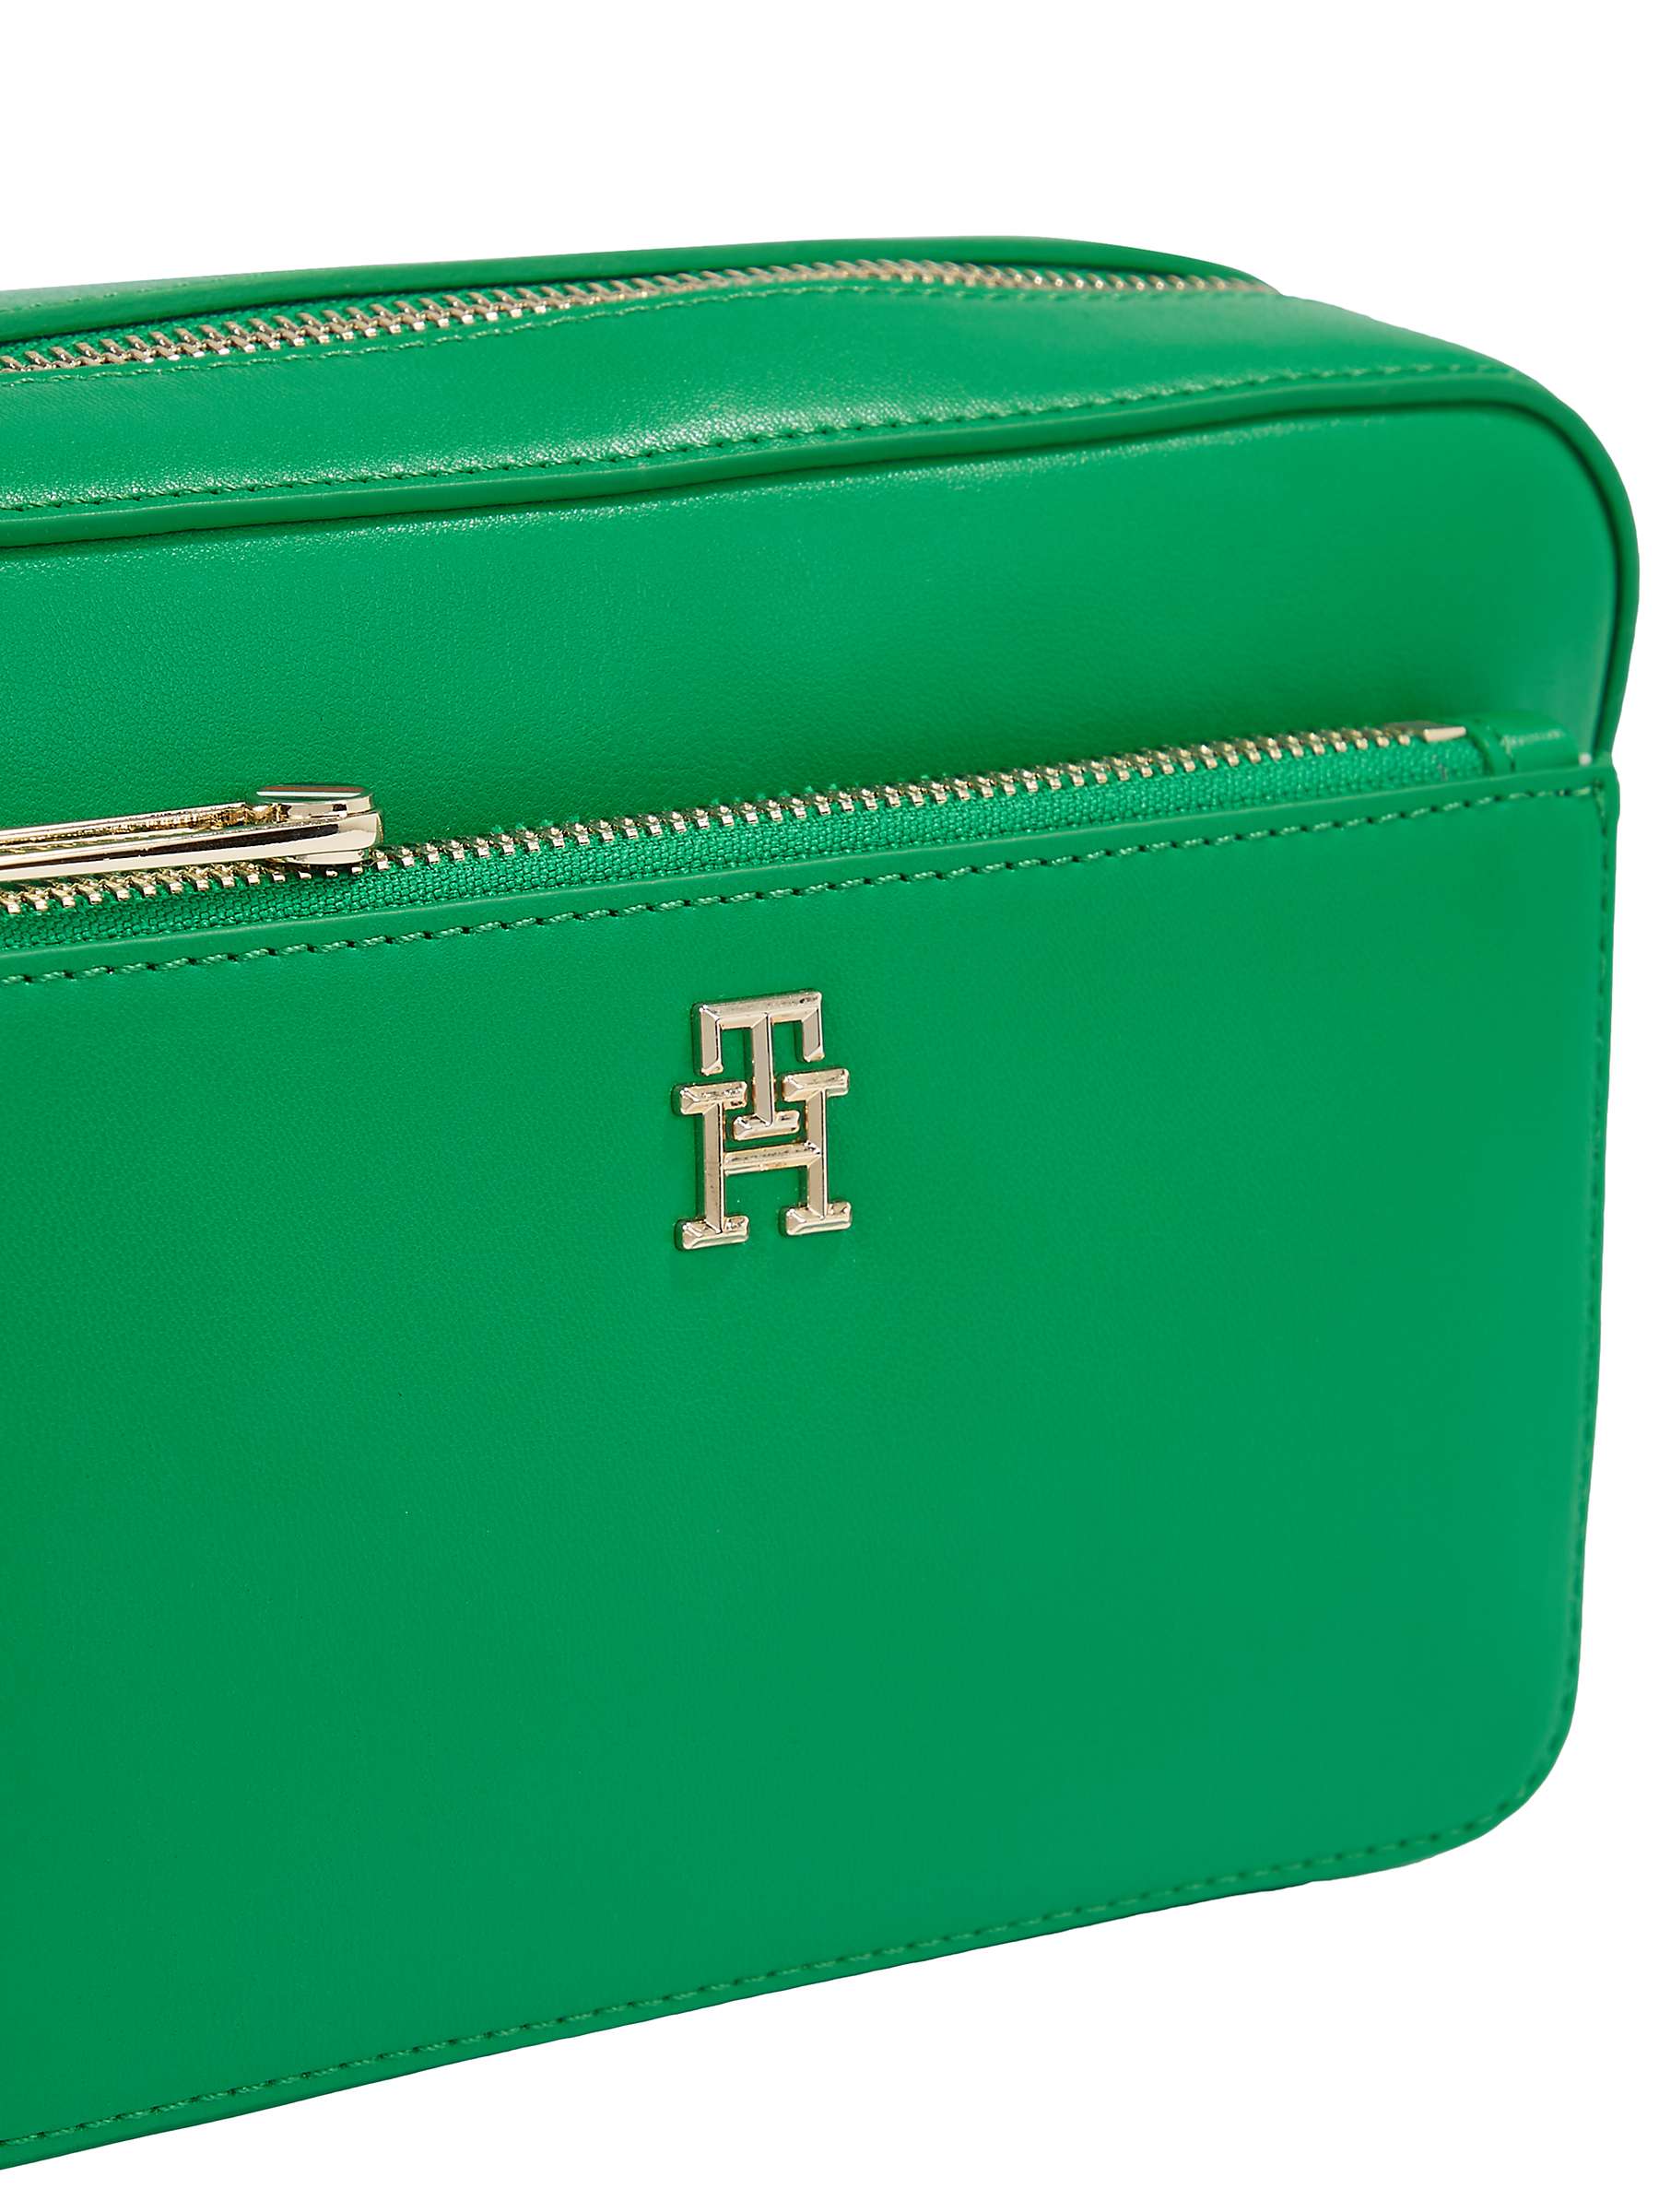 Buy Tommy Hilfiger Top Zip Camera Bag, Olympic Green Online at johnlewis.com